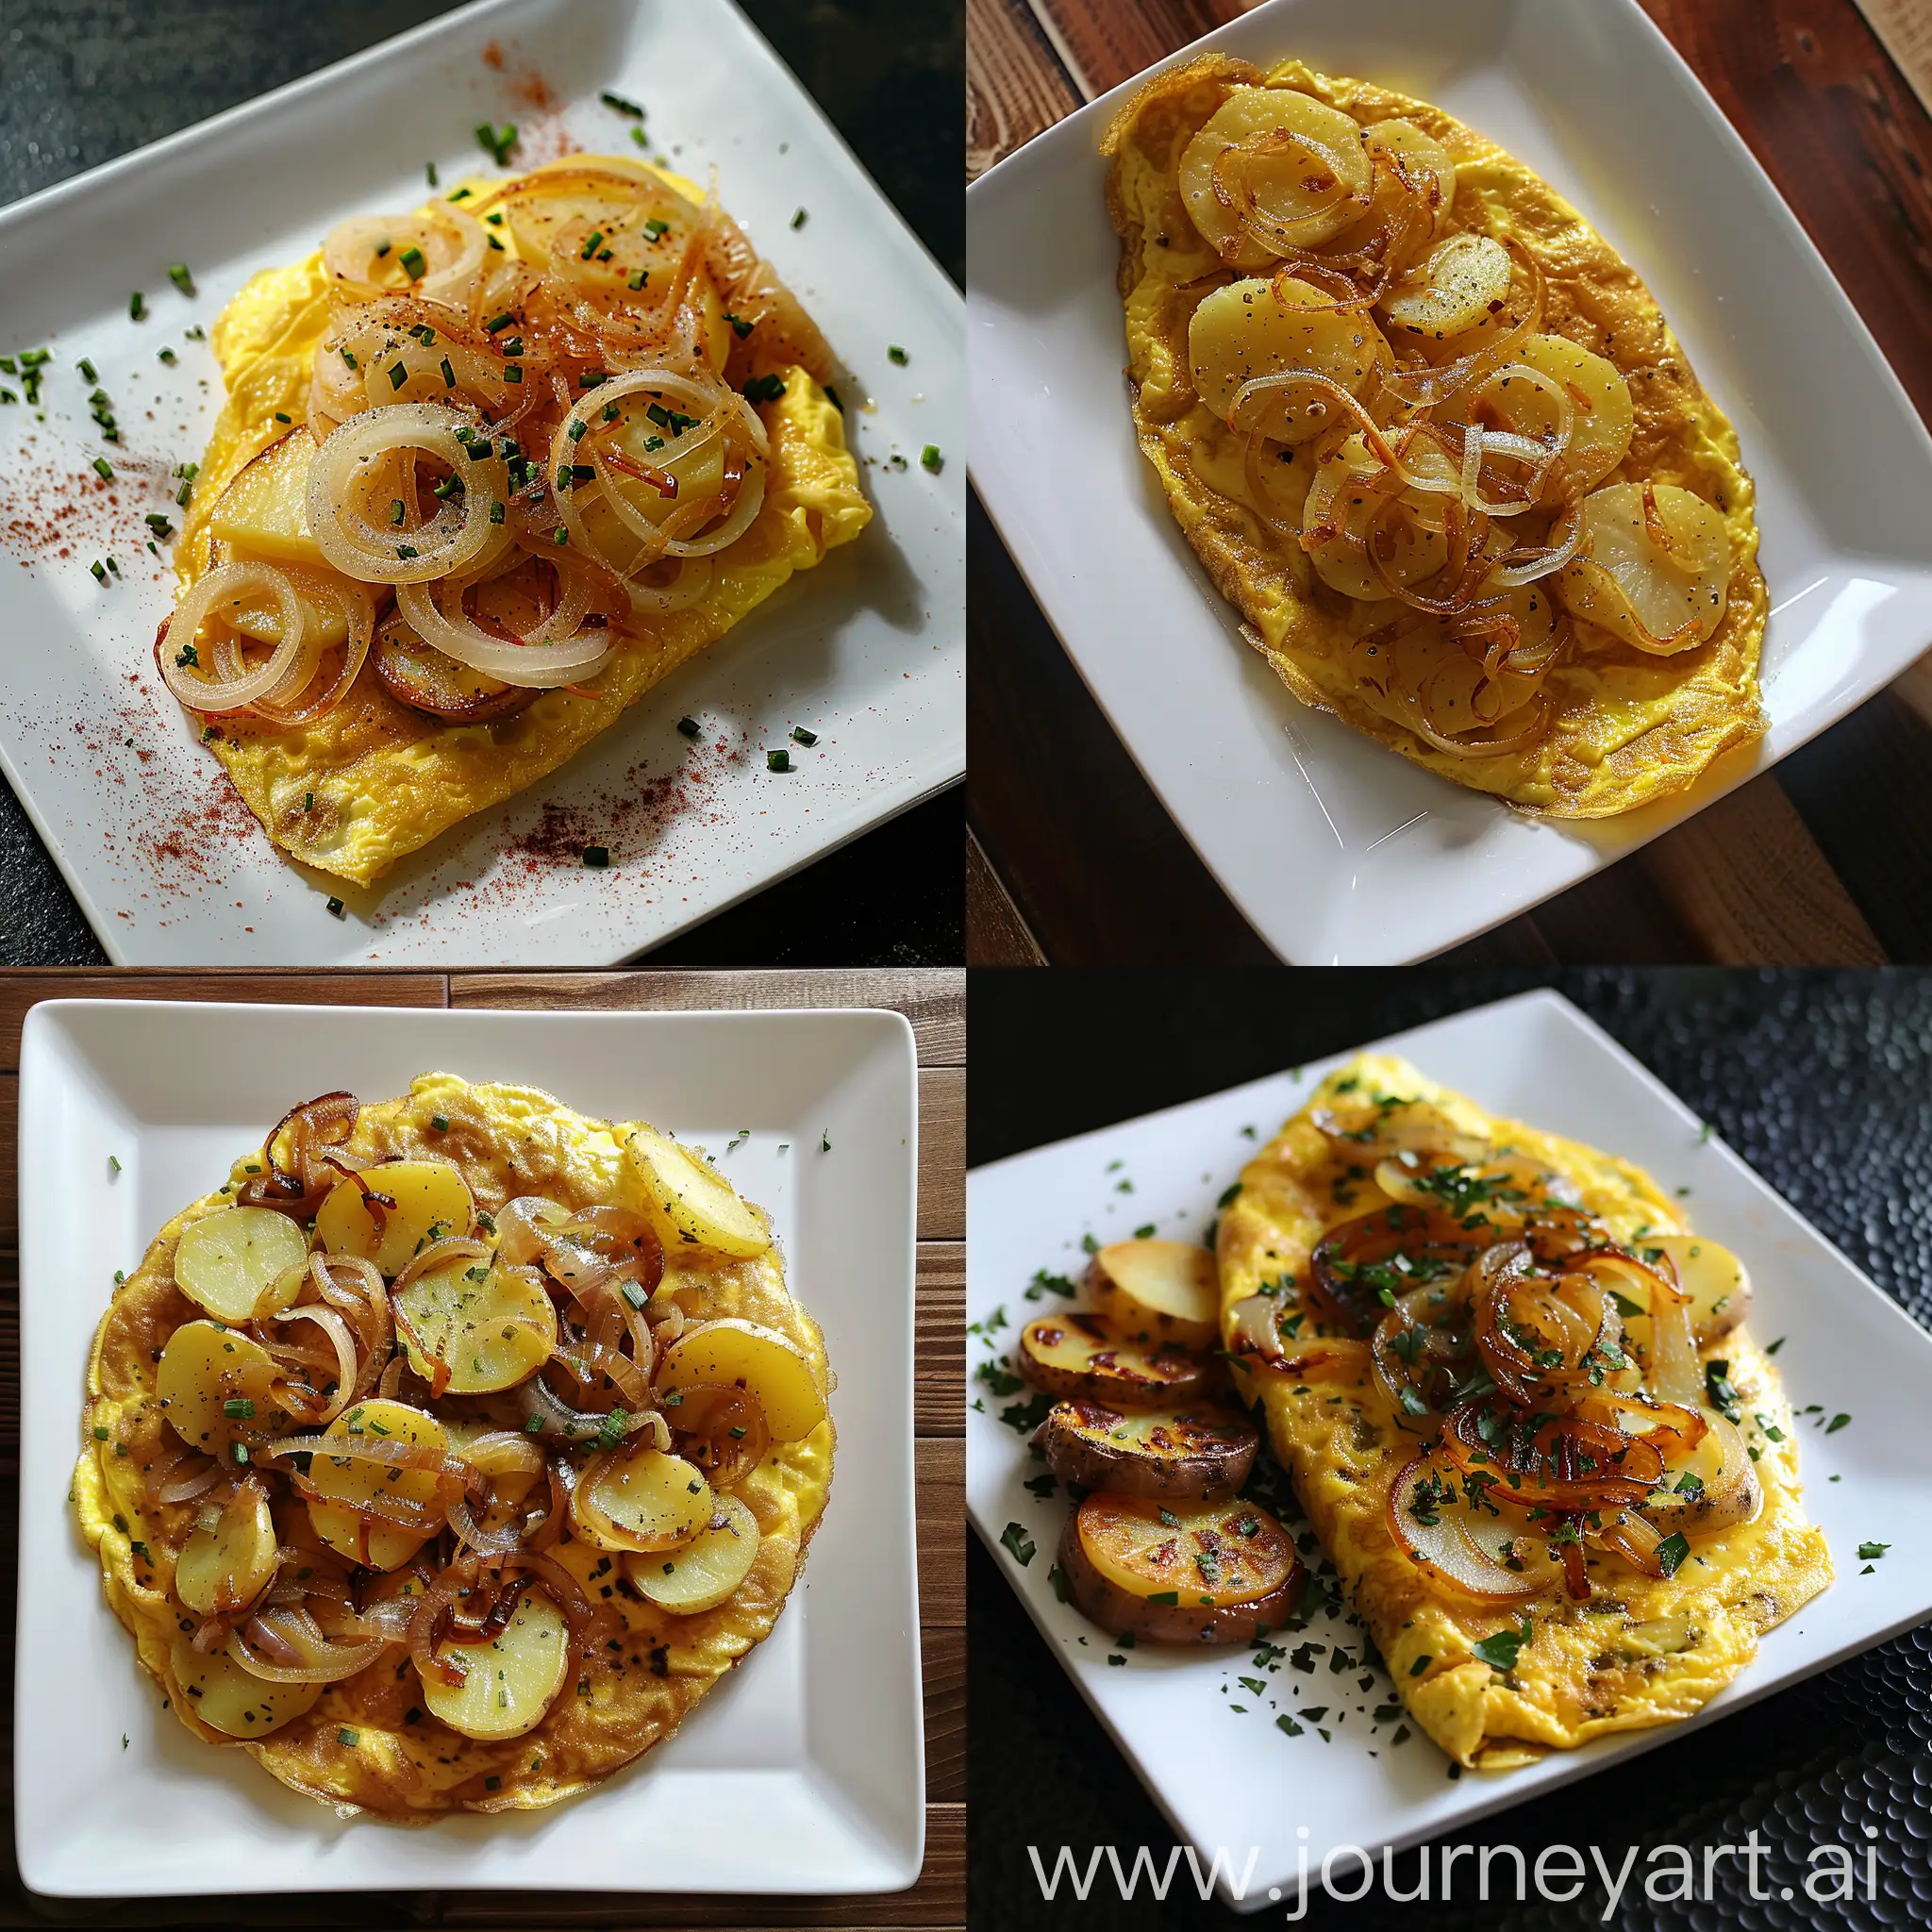 Savory-Potato-Omelette-with-Caramelized-Onion-on-Square-White-Plate